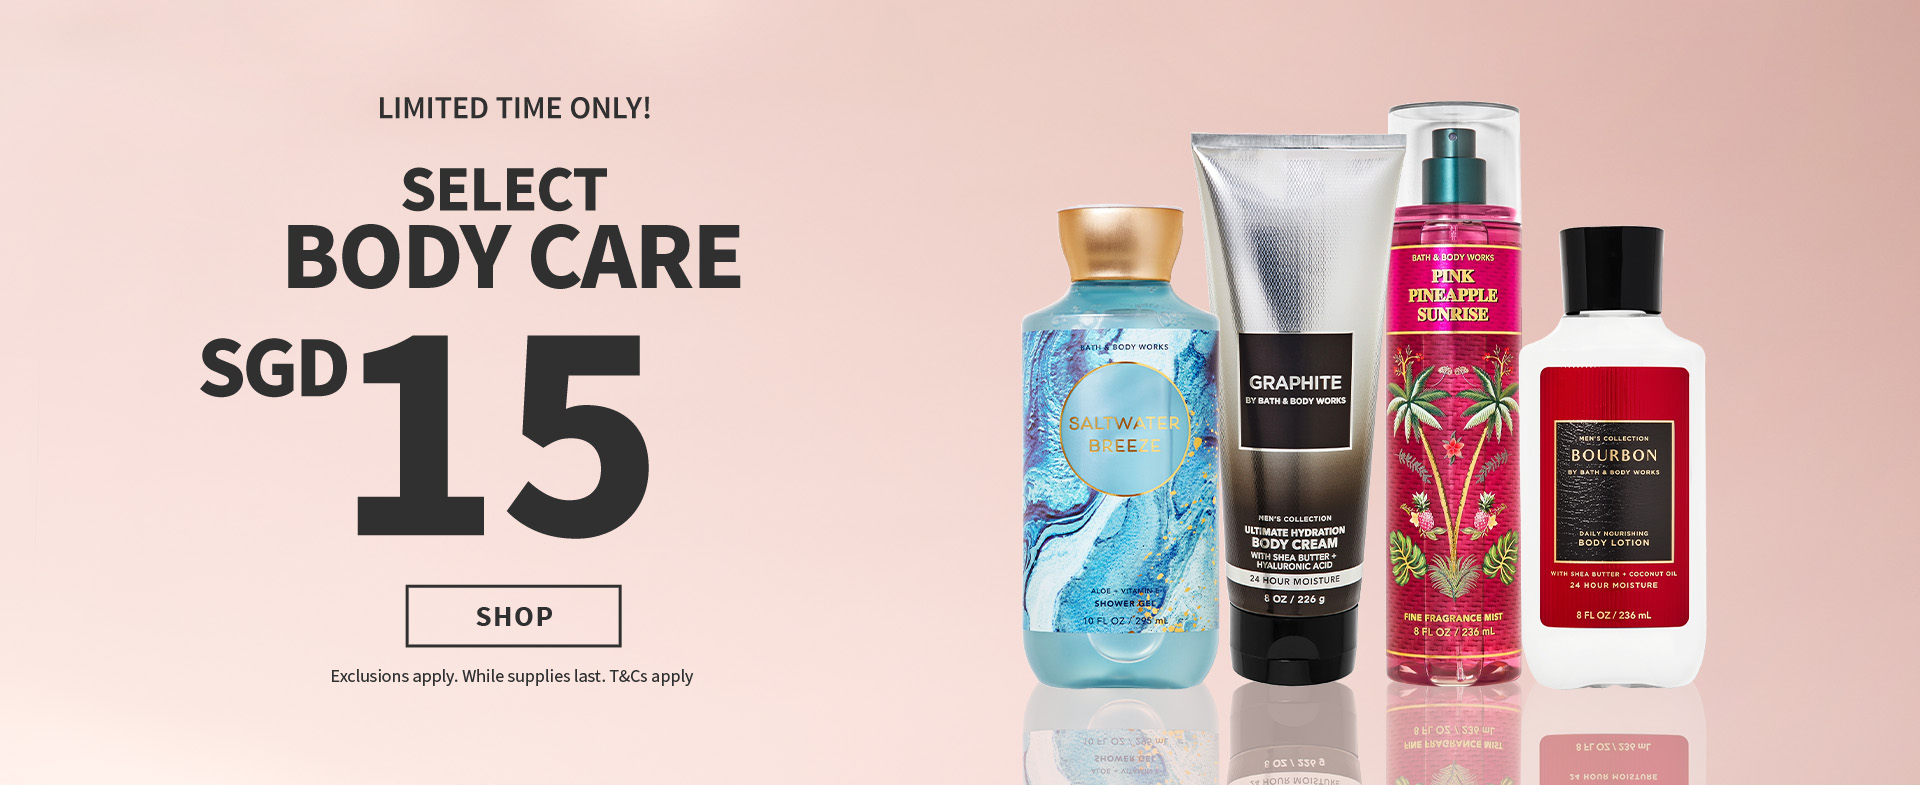 LIMITED TIME ONLY! SELECT BODY CARE